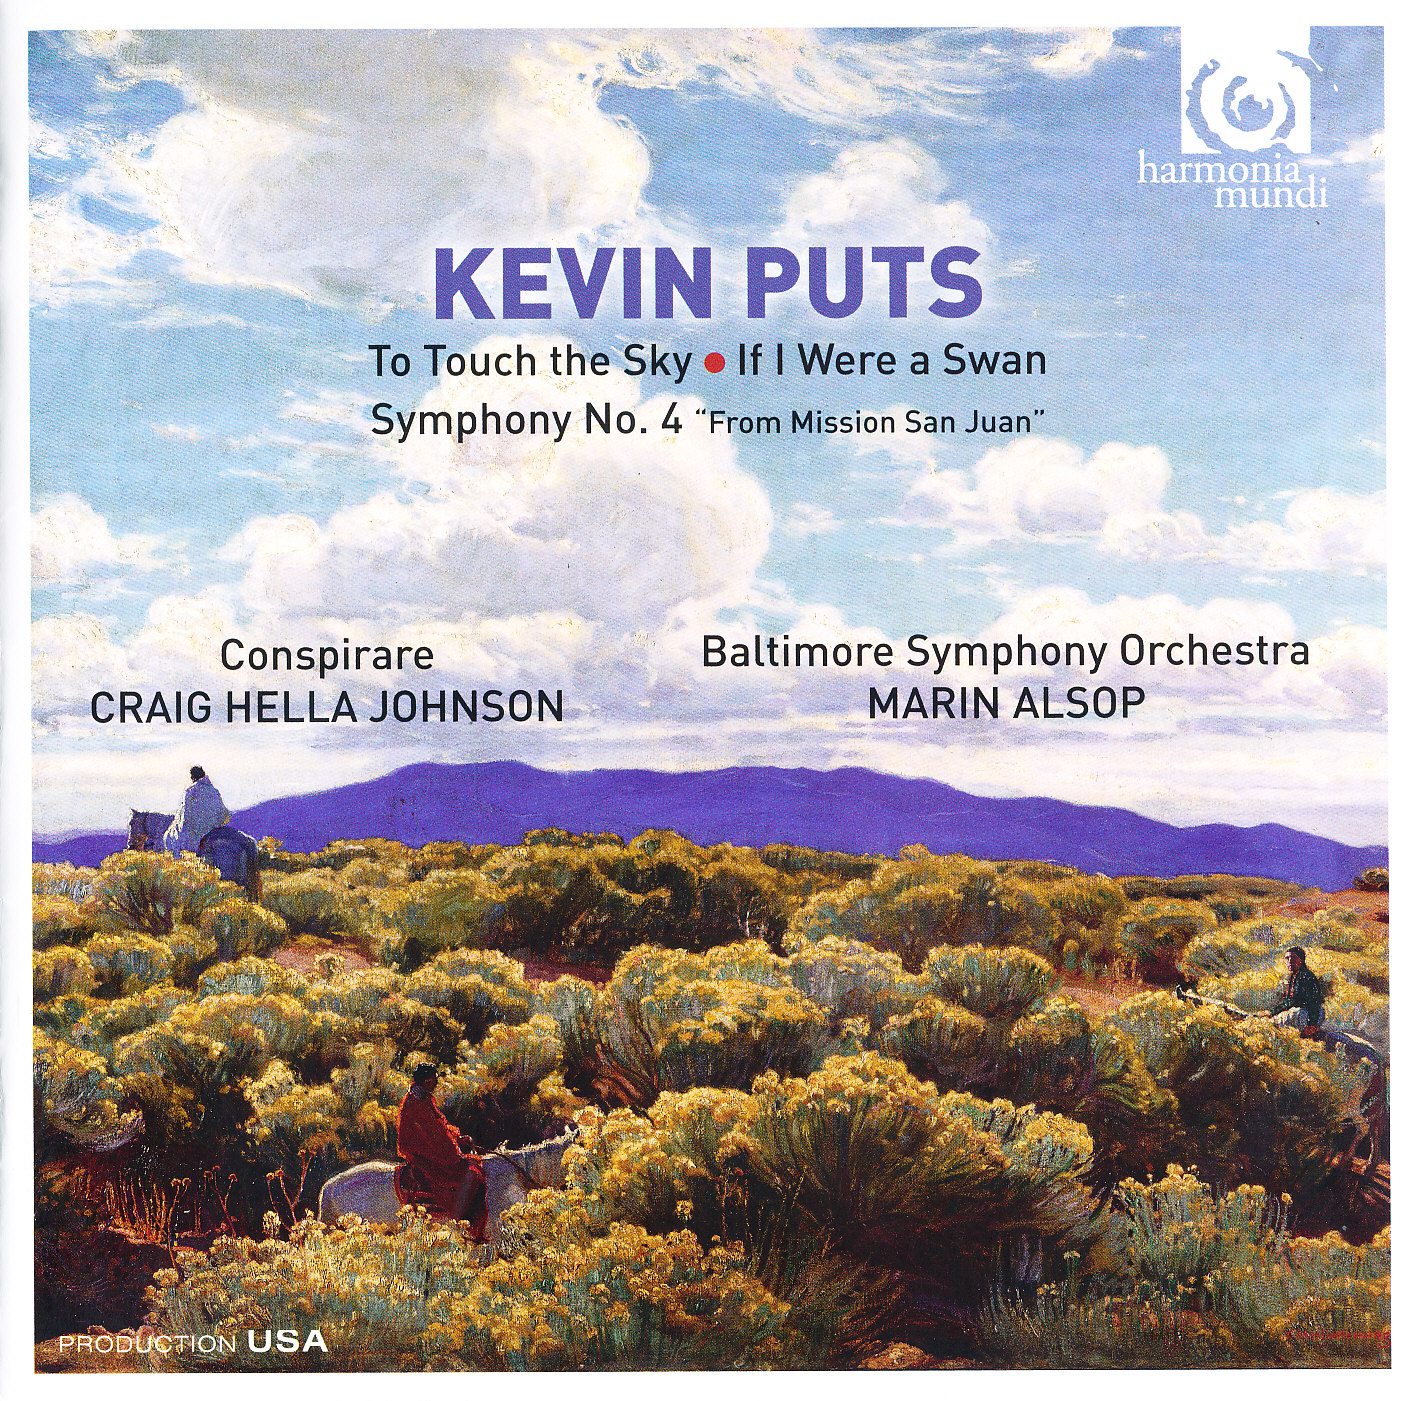 Kevin Puts - To Touch the Sky, IF I Were a Swan, Symphony No.4 "From Mission San Juan"